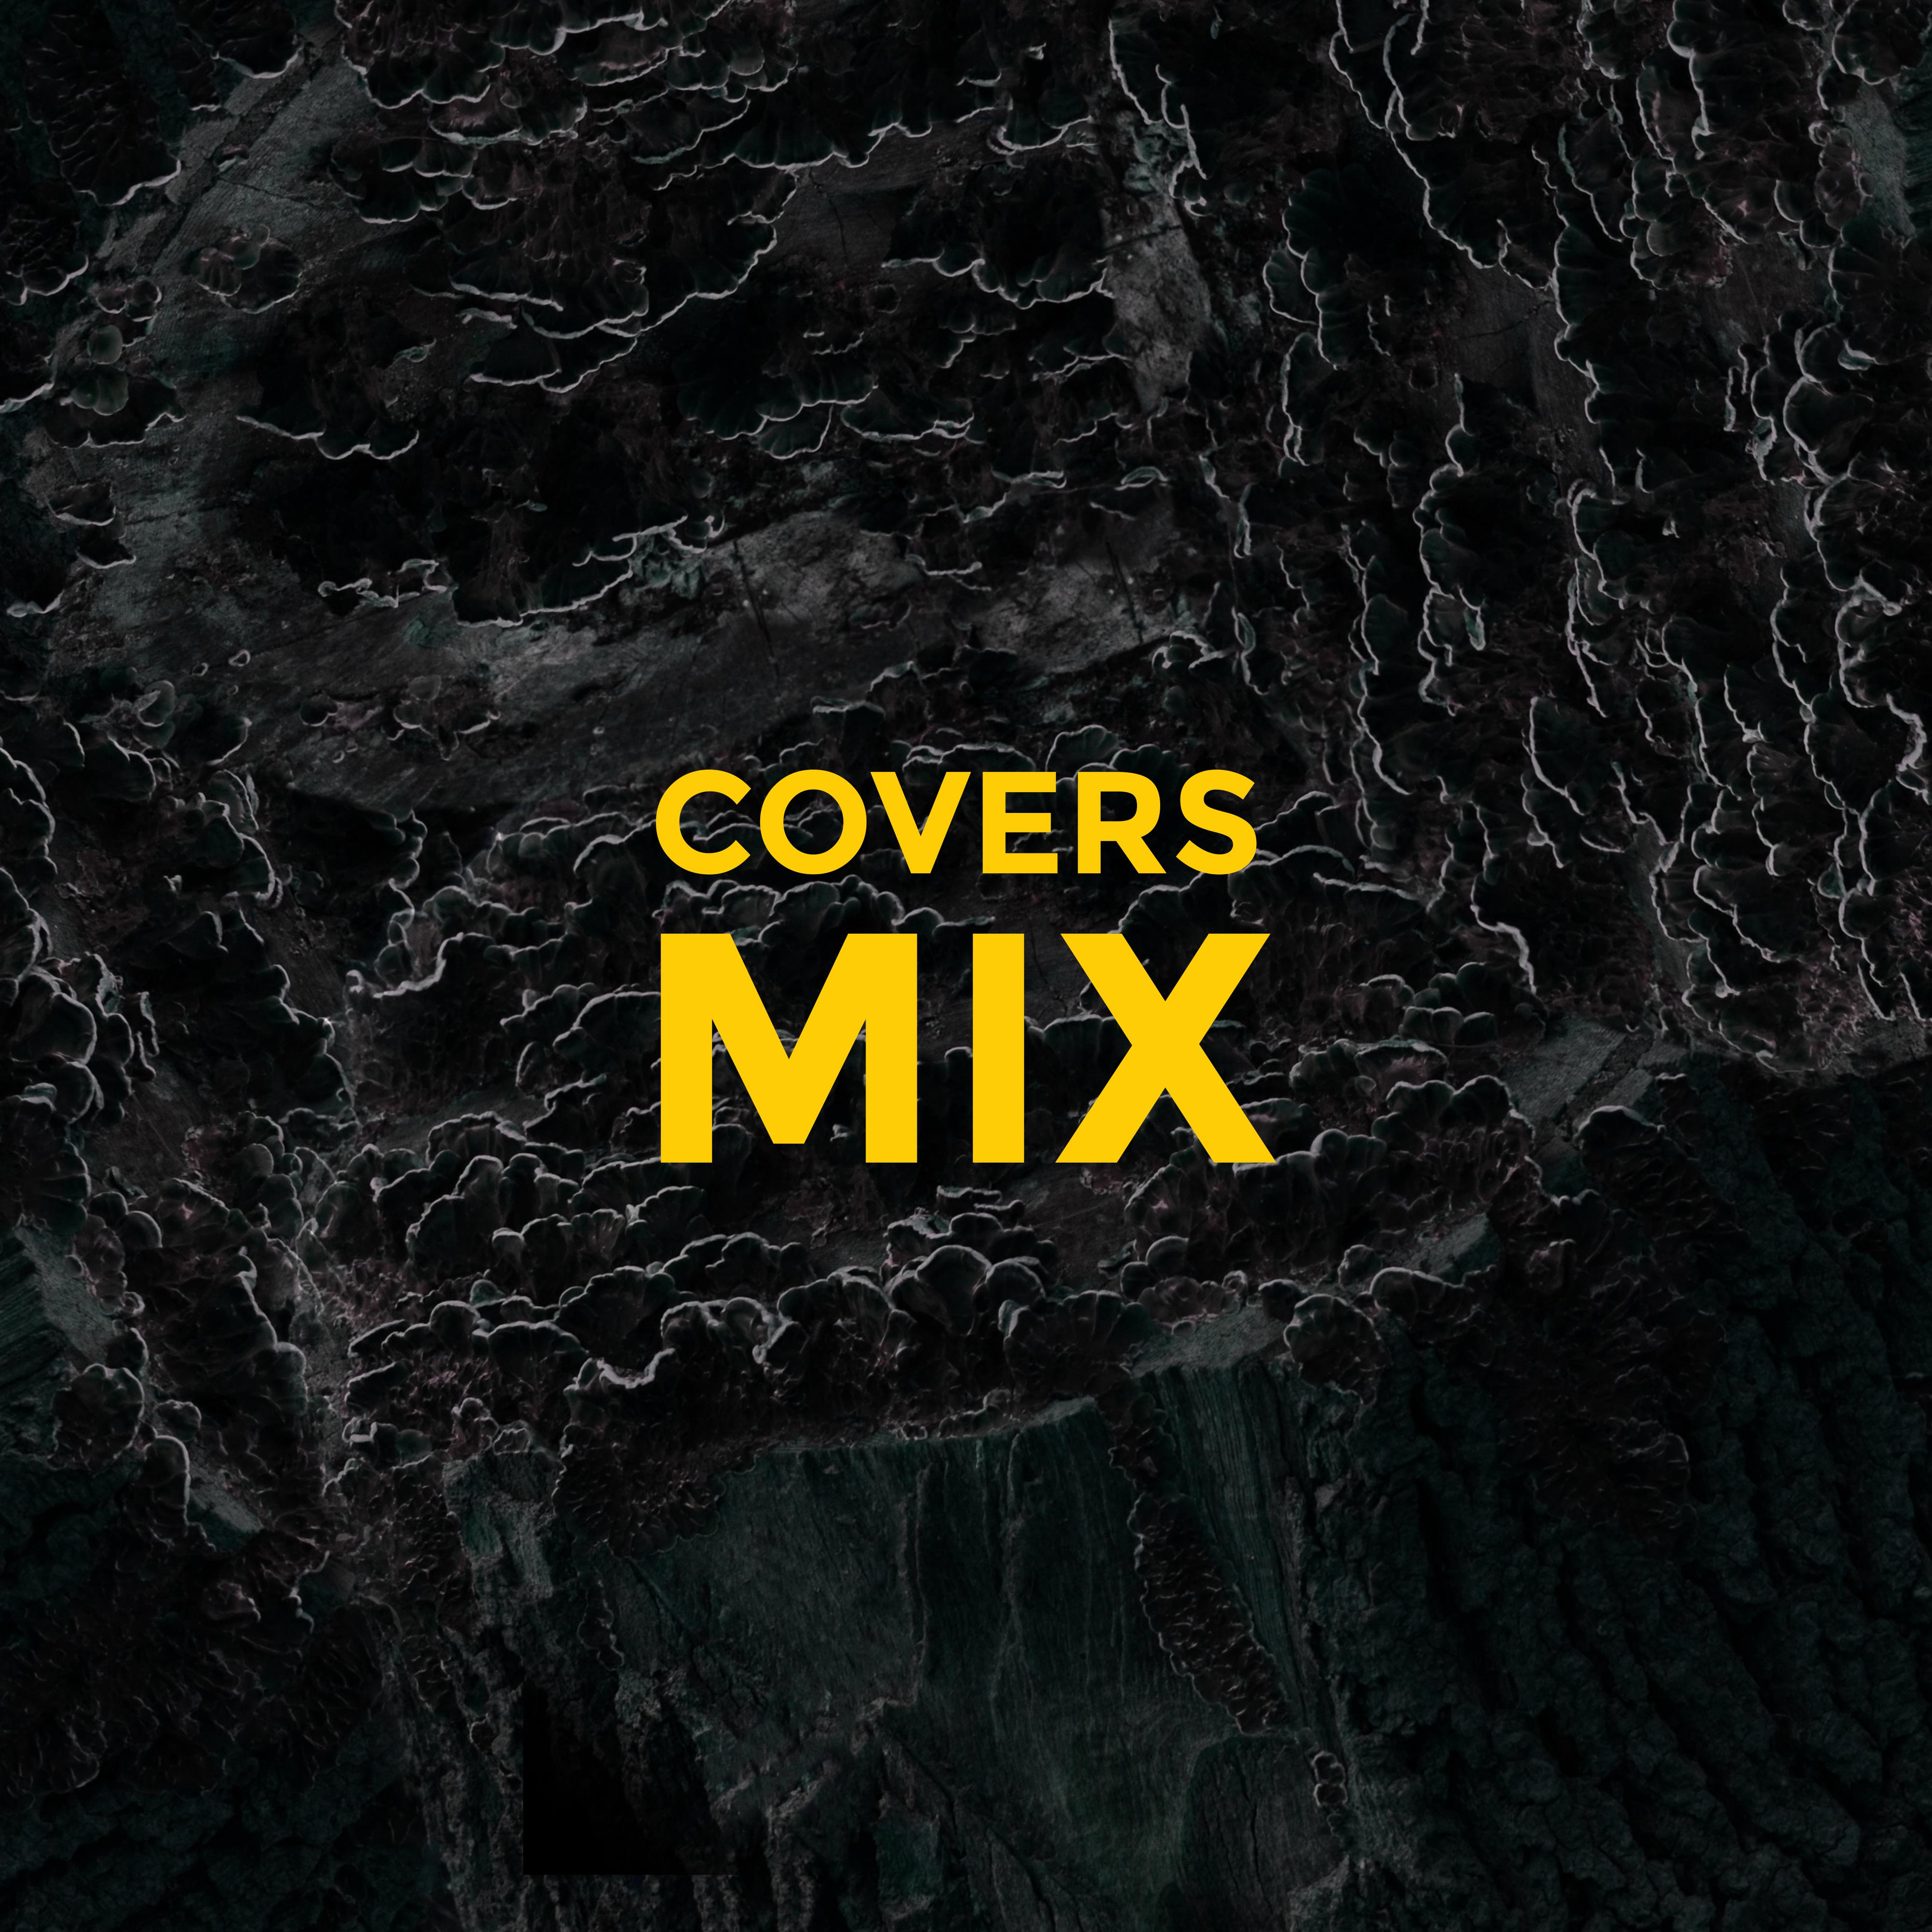 Covers Mix  Instrumental Sounds for Relaxation, Ambient Music